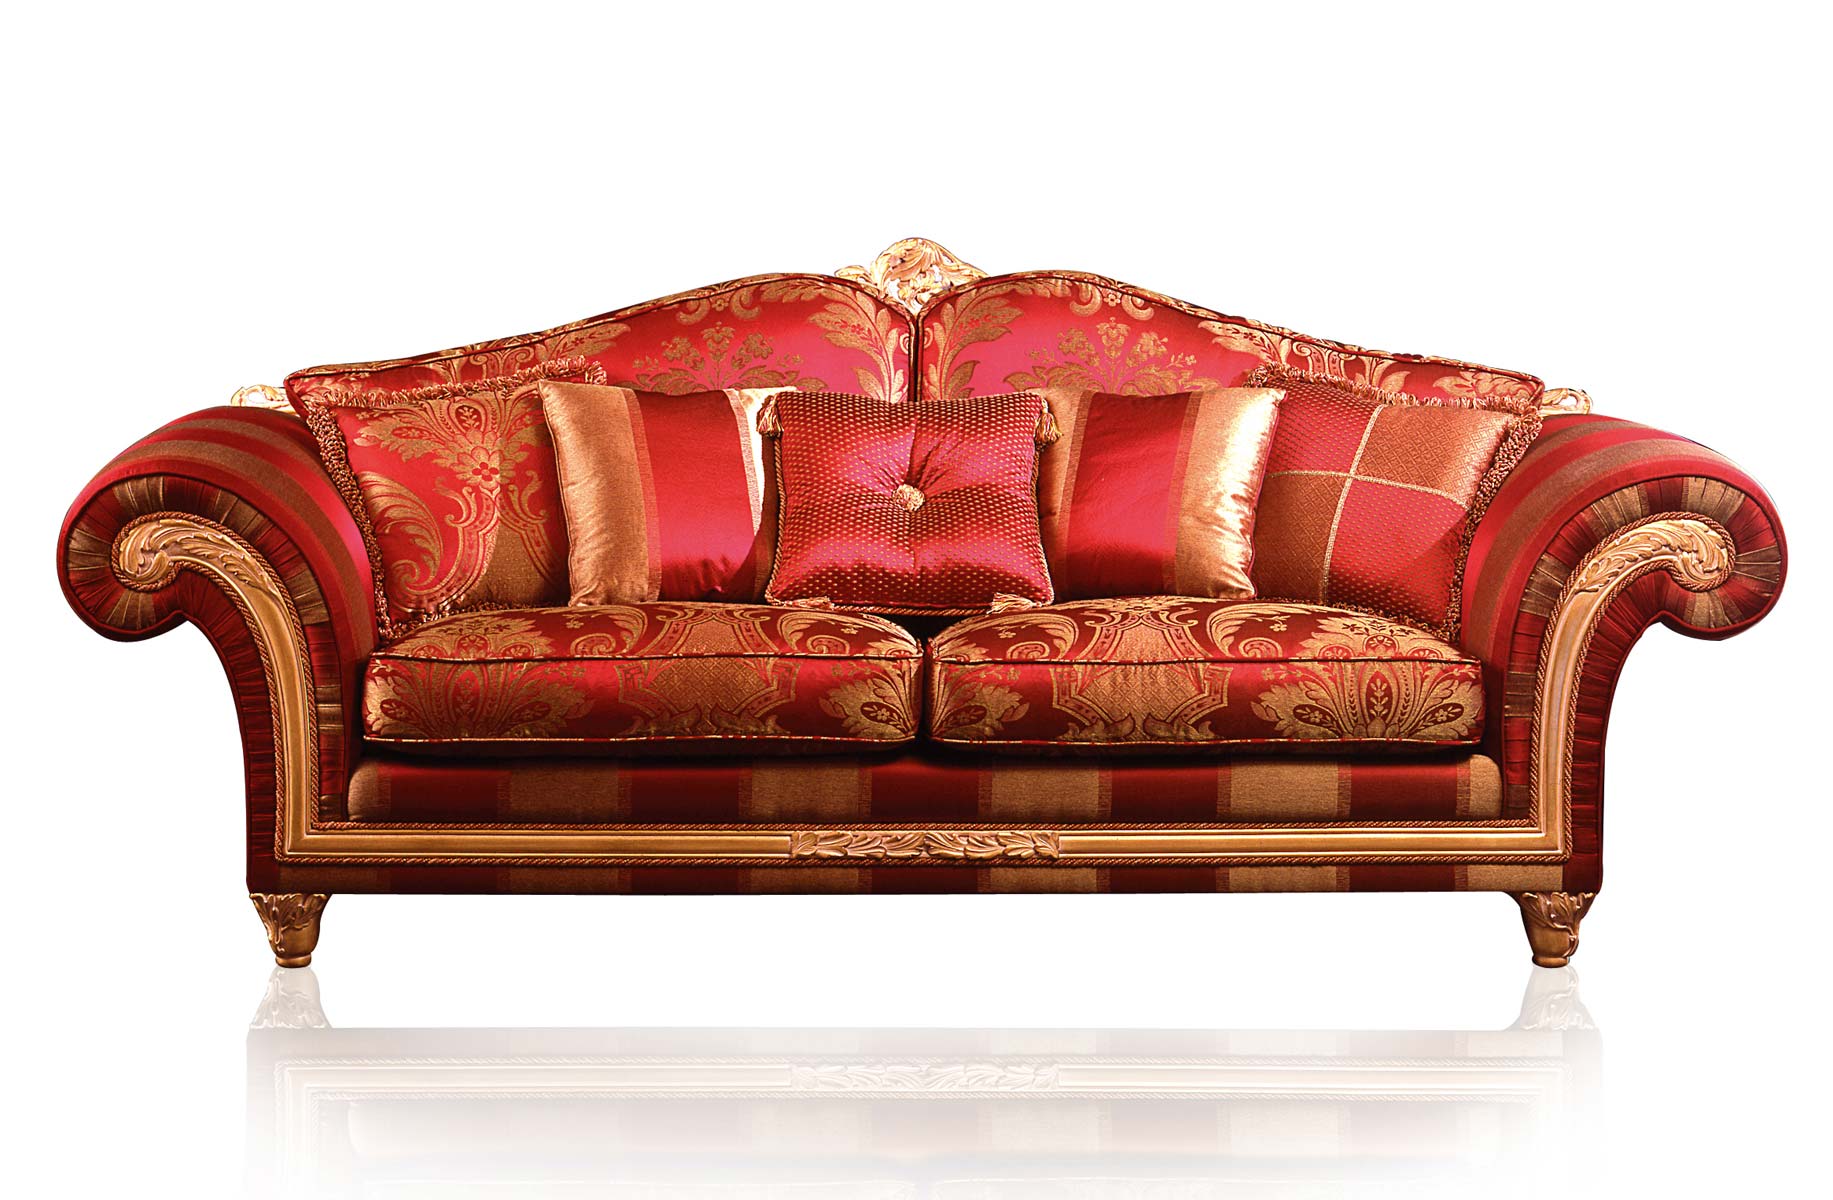 Luxury Classic Sofa and Armchairs - Imperial by Vimercati ...